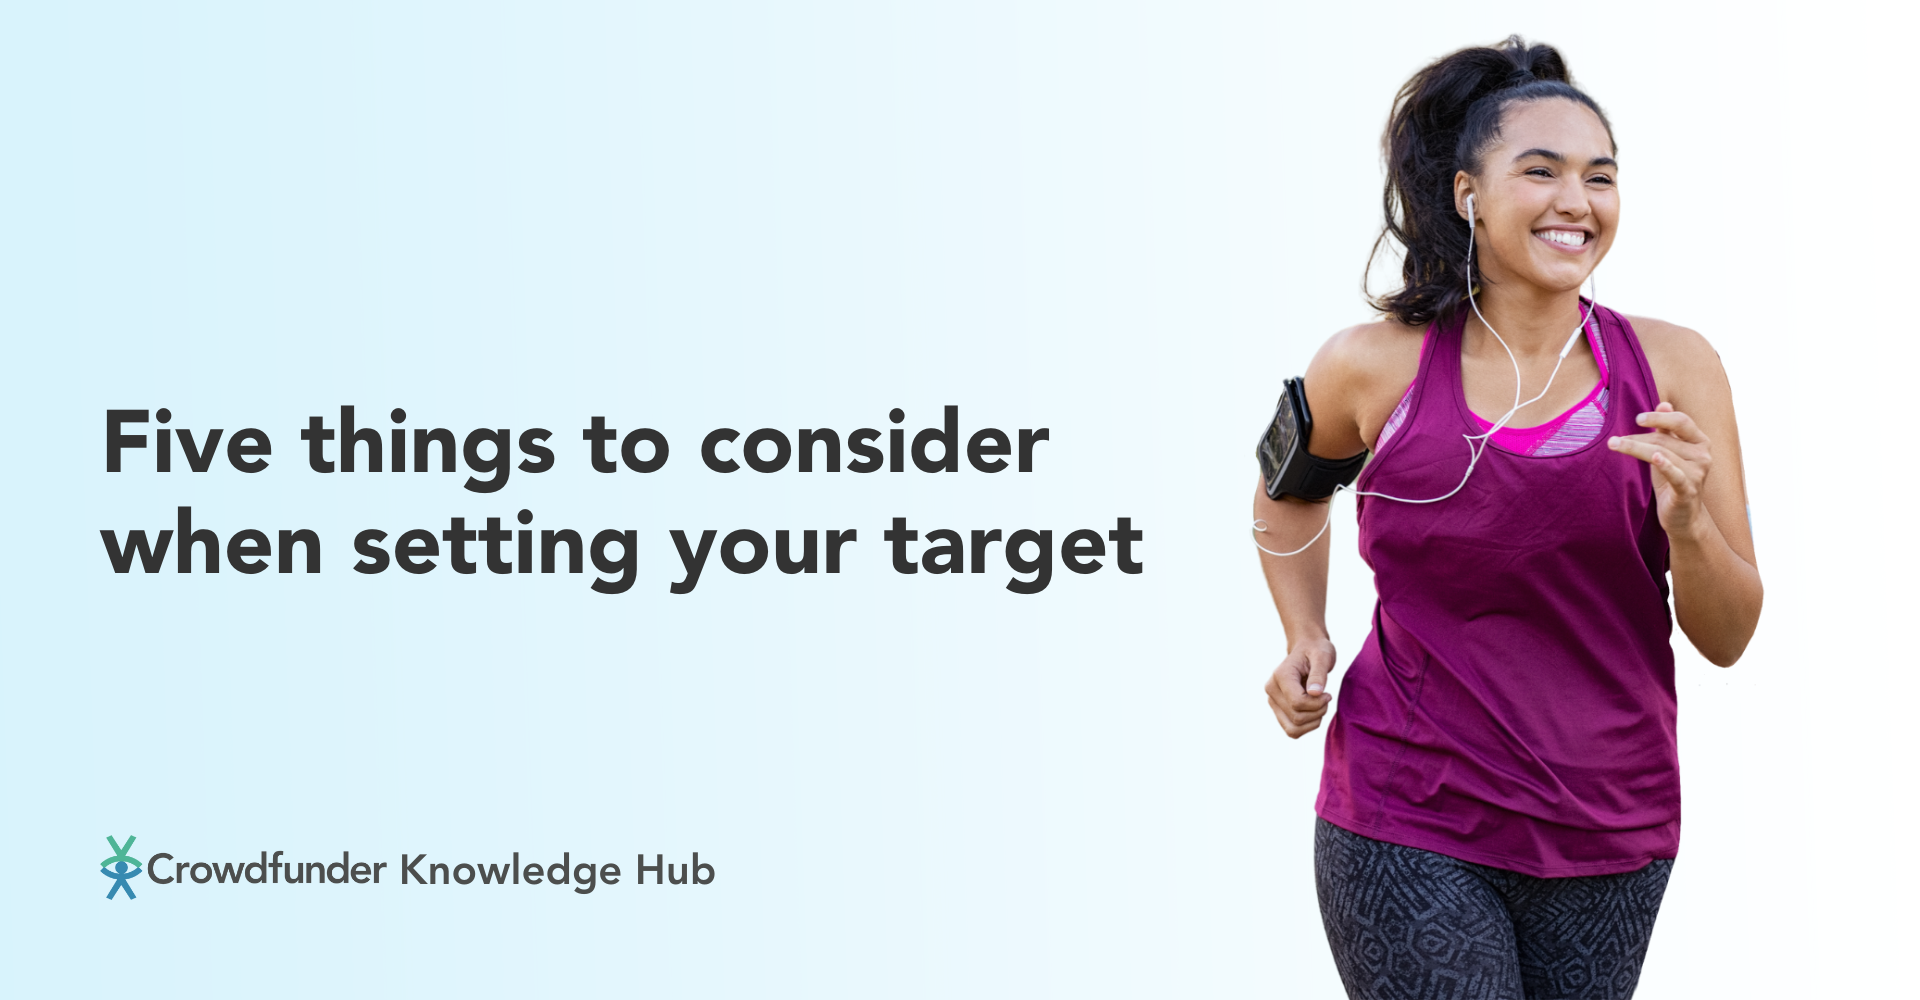 Five things to consider when setting your target